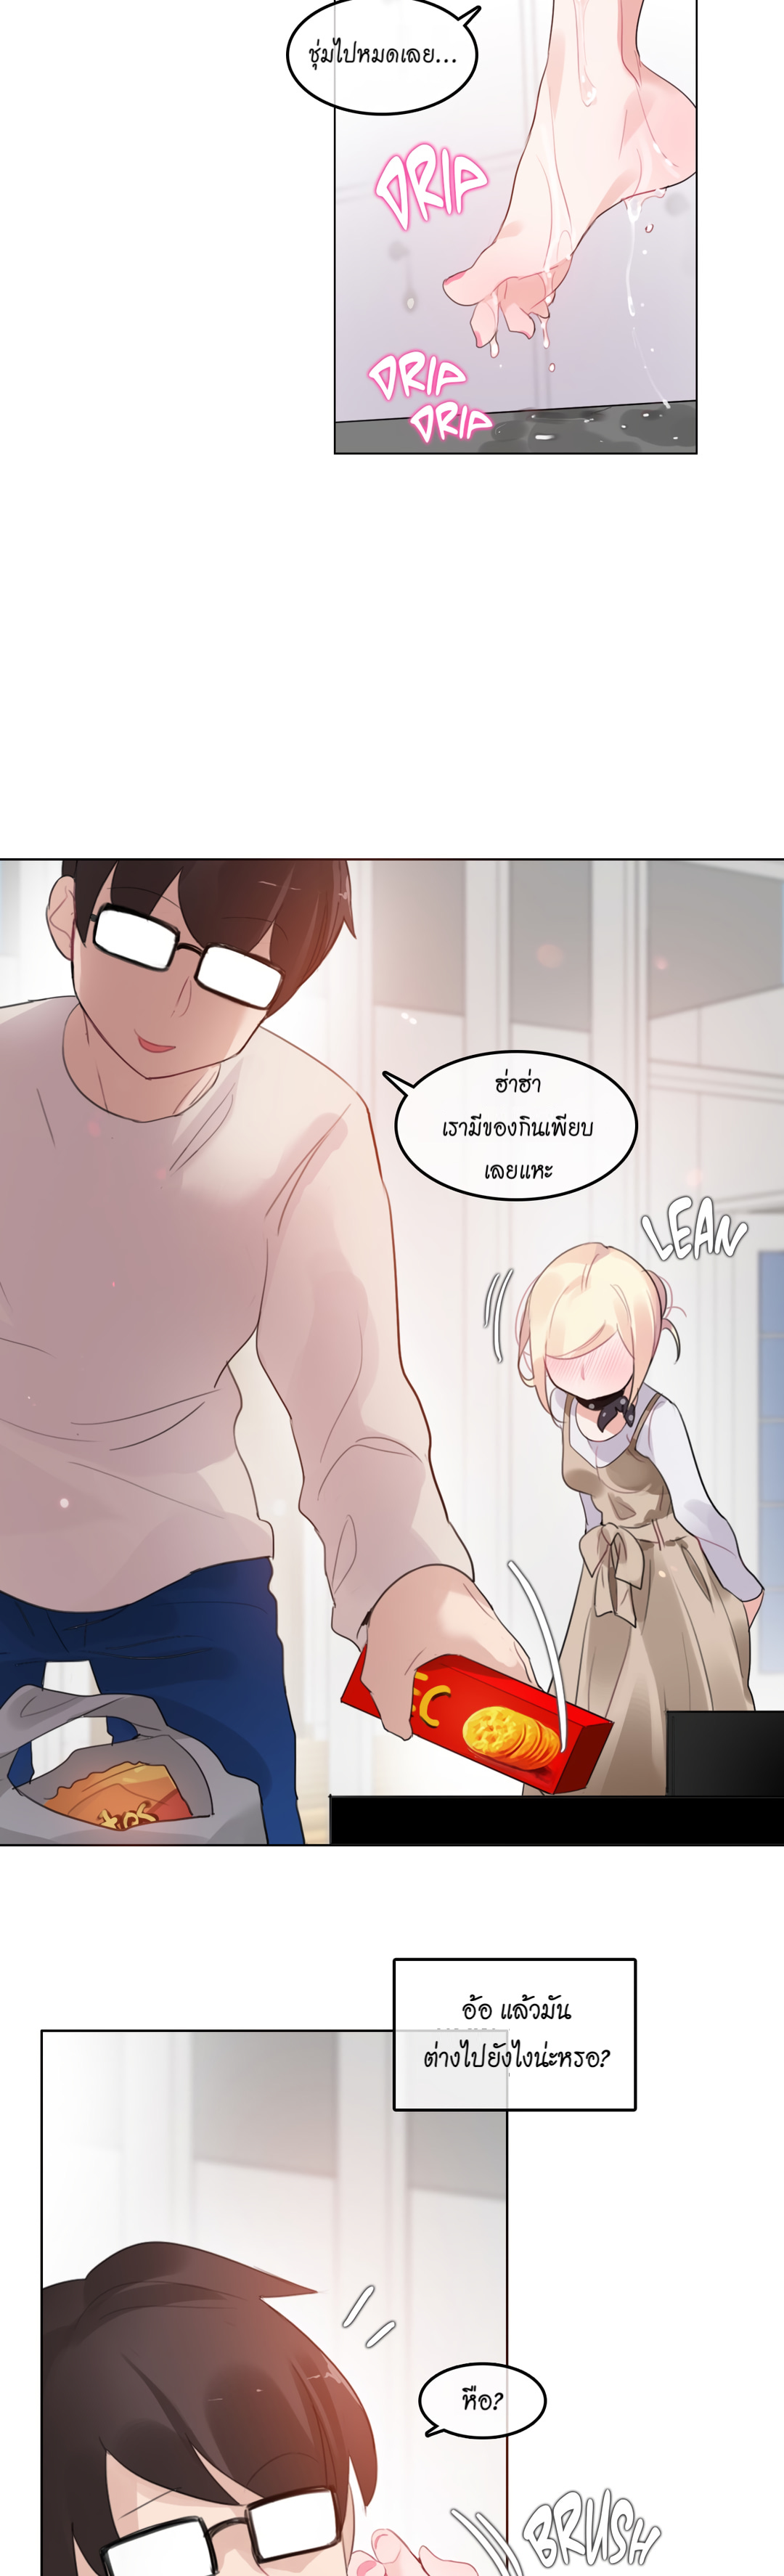 A Pervert’s Daily Life56 (16)